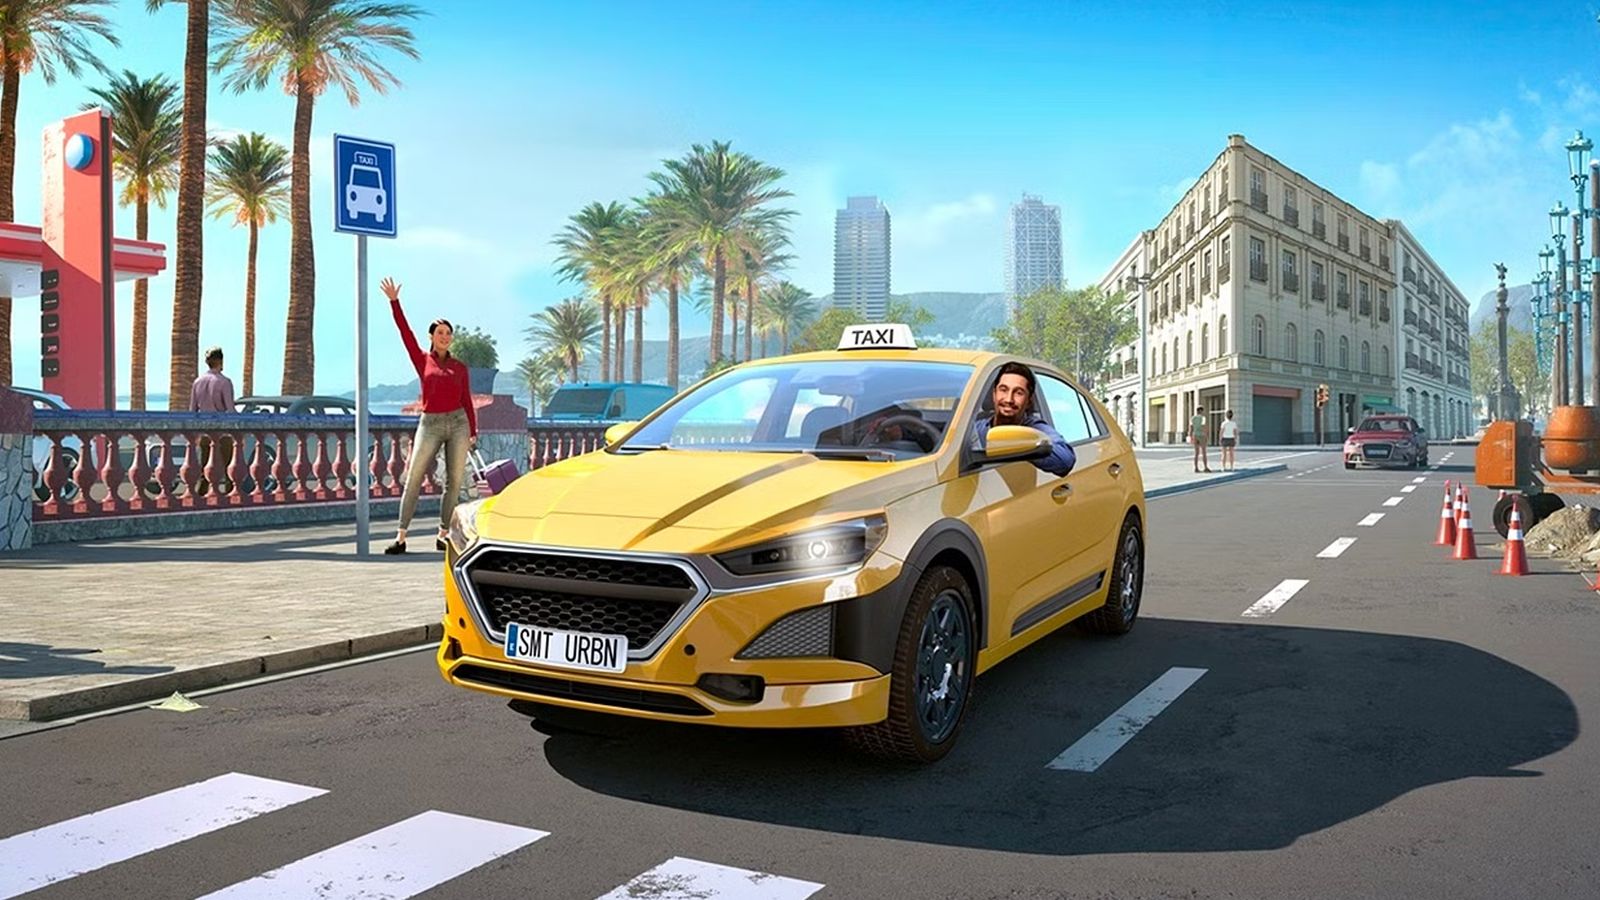 Taxi Life: A City Driving Simulator PC System Requirements